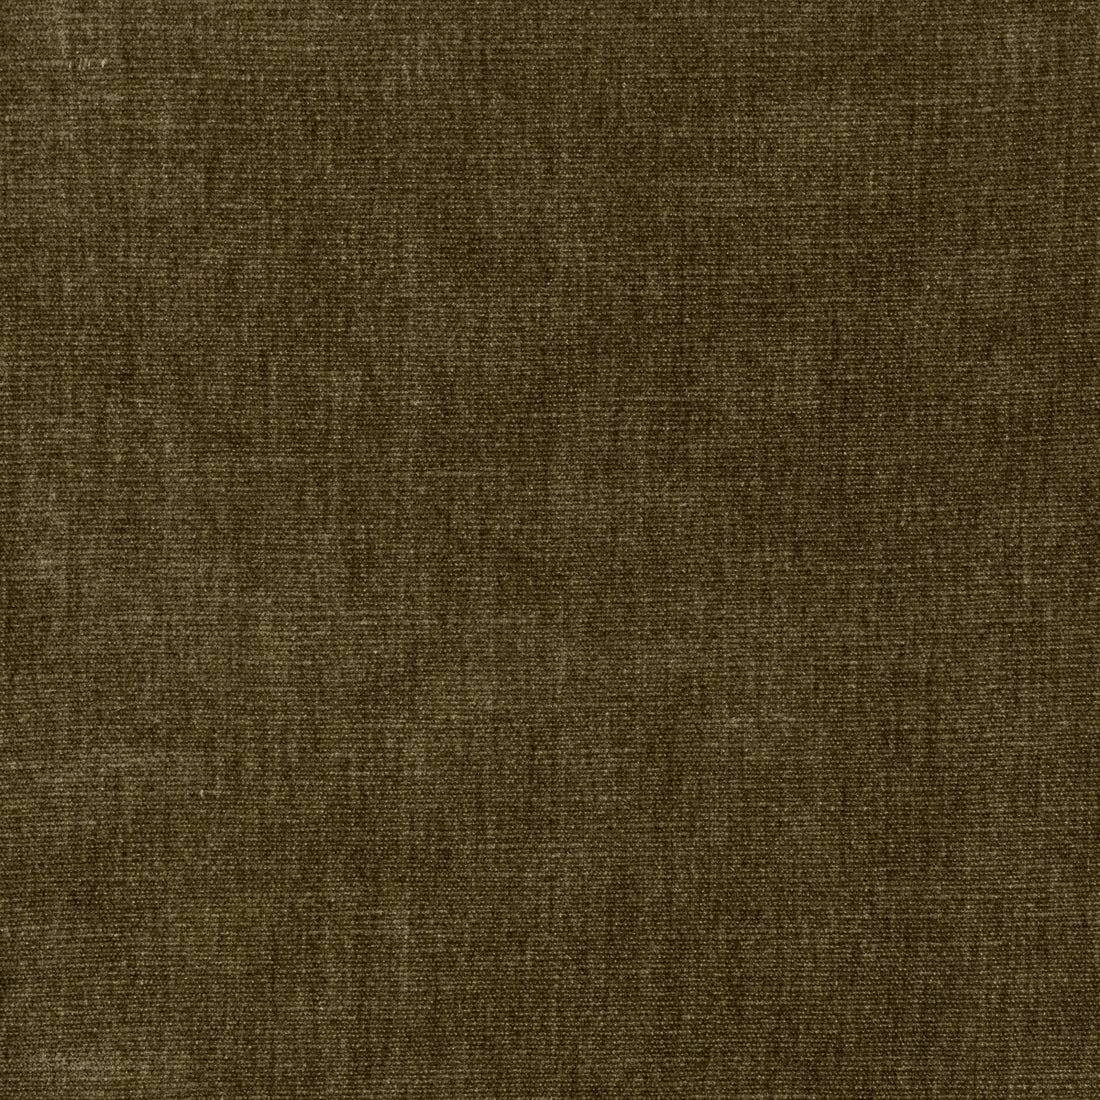 Kravet Smart fabric in 36076-66 color - pattern 36076.66.0 - by Kravet Smart in the Sumptuous Chenille II collection